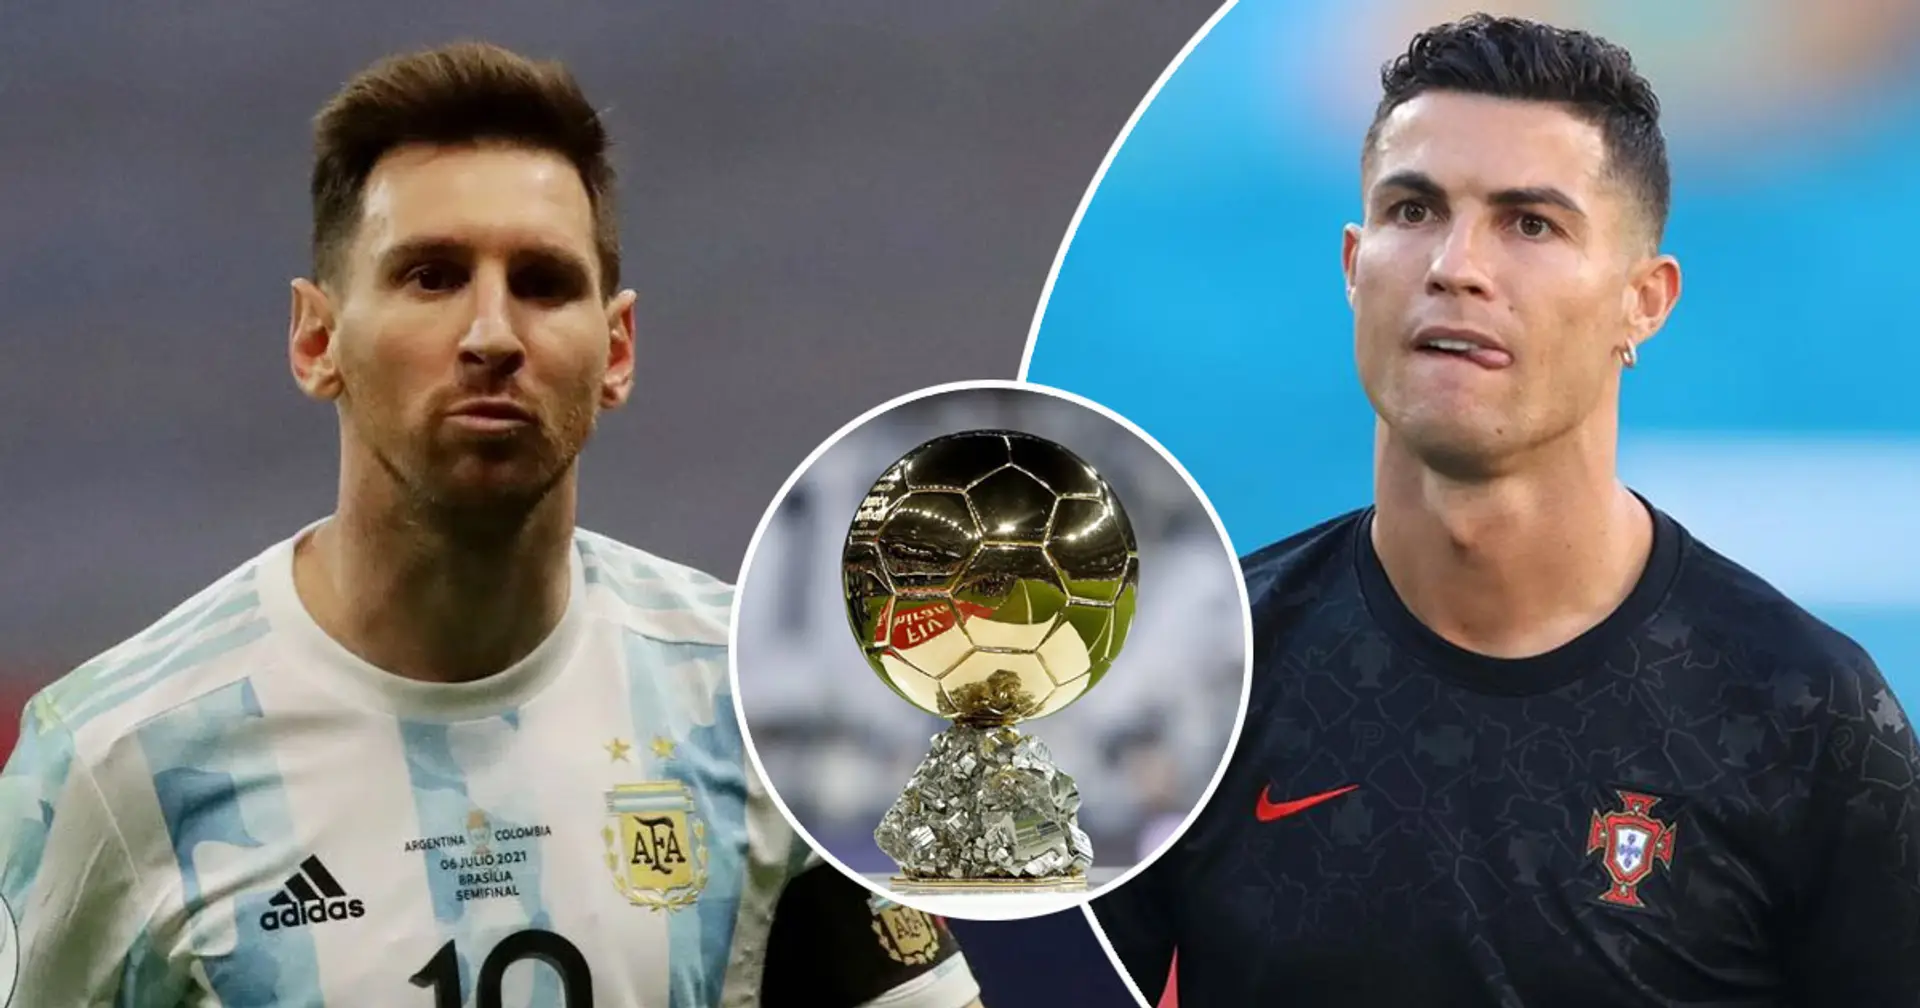 2020/21 Ballon d'Or odds: Messi leading the pack, Ronaldo emerges as runner-up